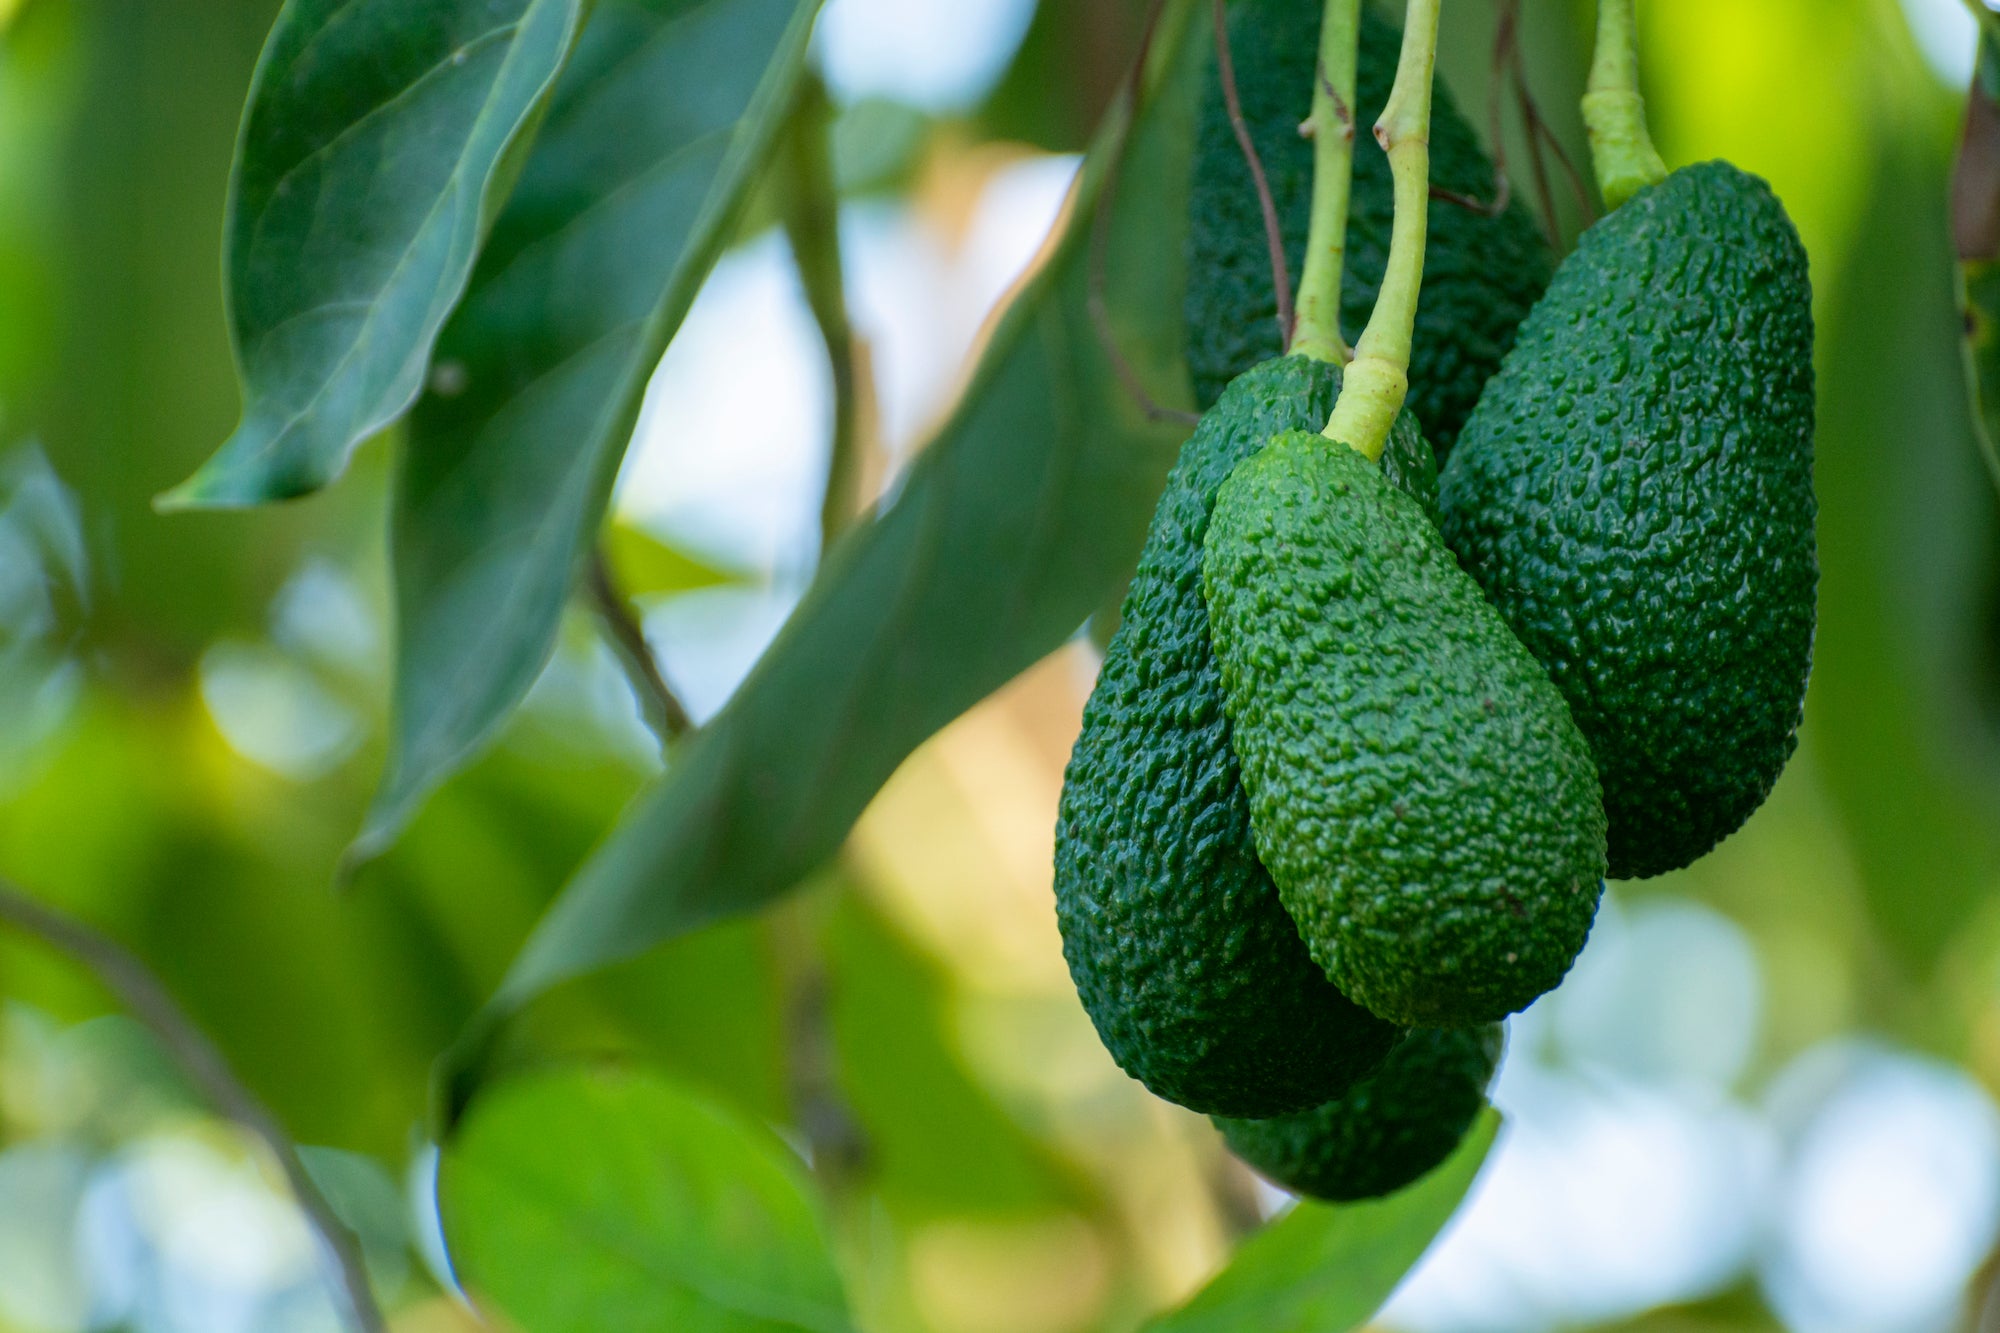 Top 10 Amazing Facts About Avocados